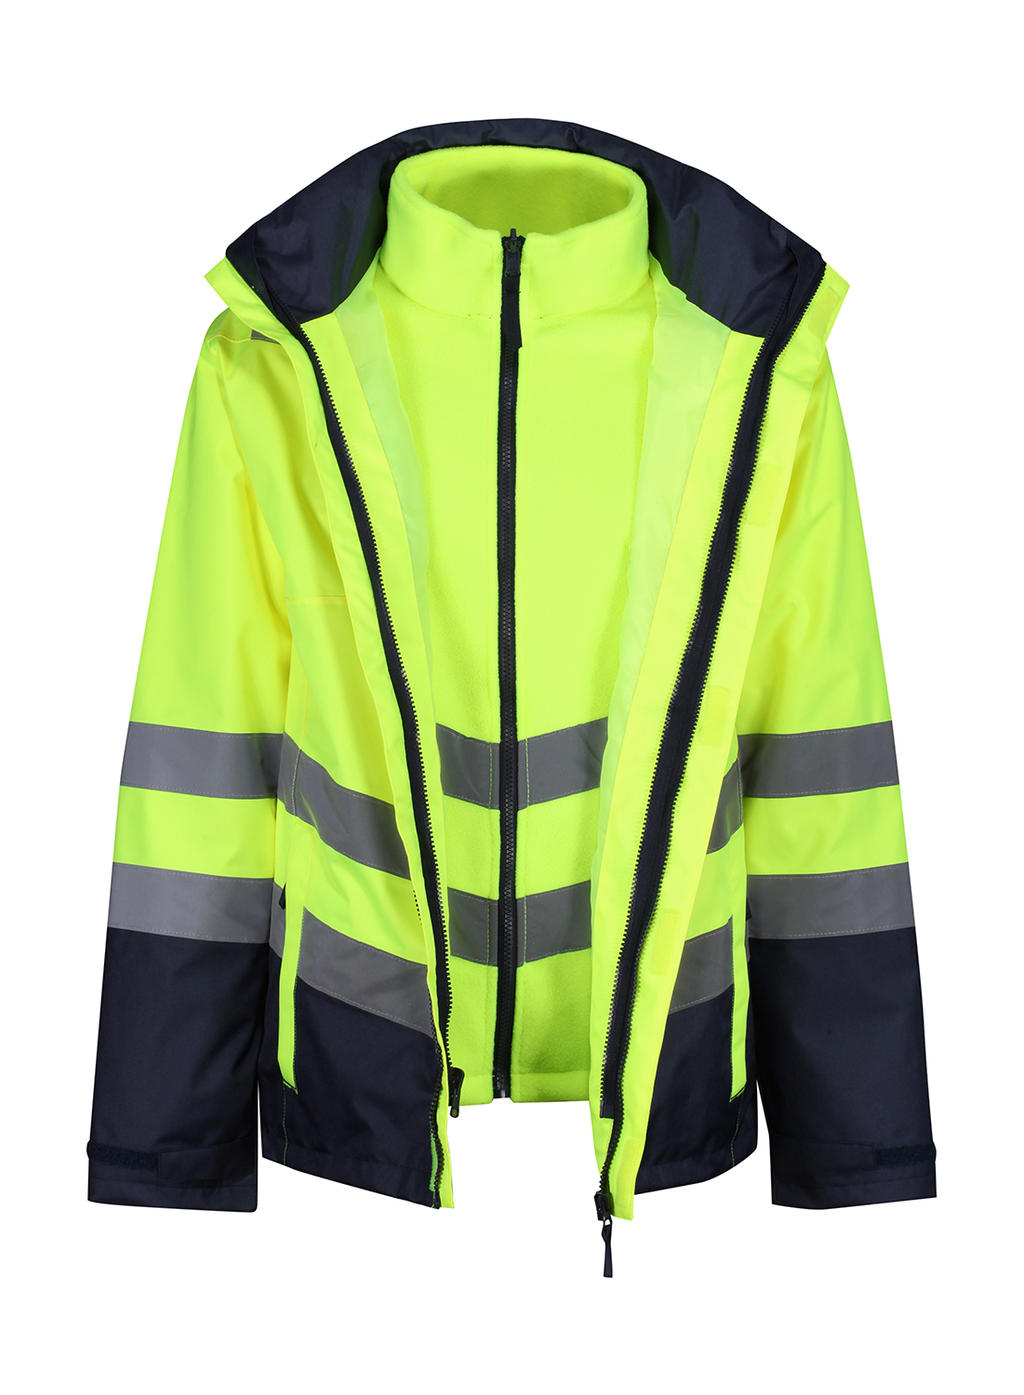  Pro Hi Vis 3-in-1 Jacket in Farbe Yellow/Navy